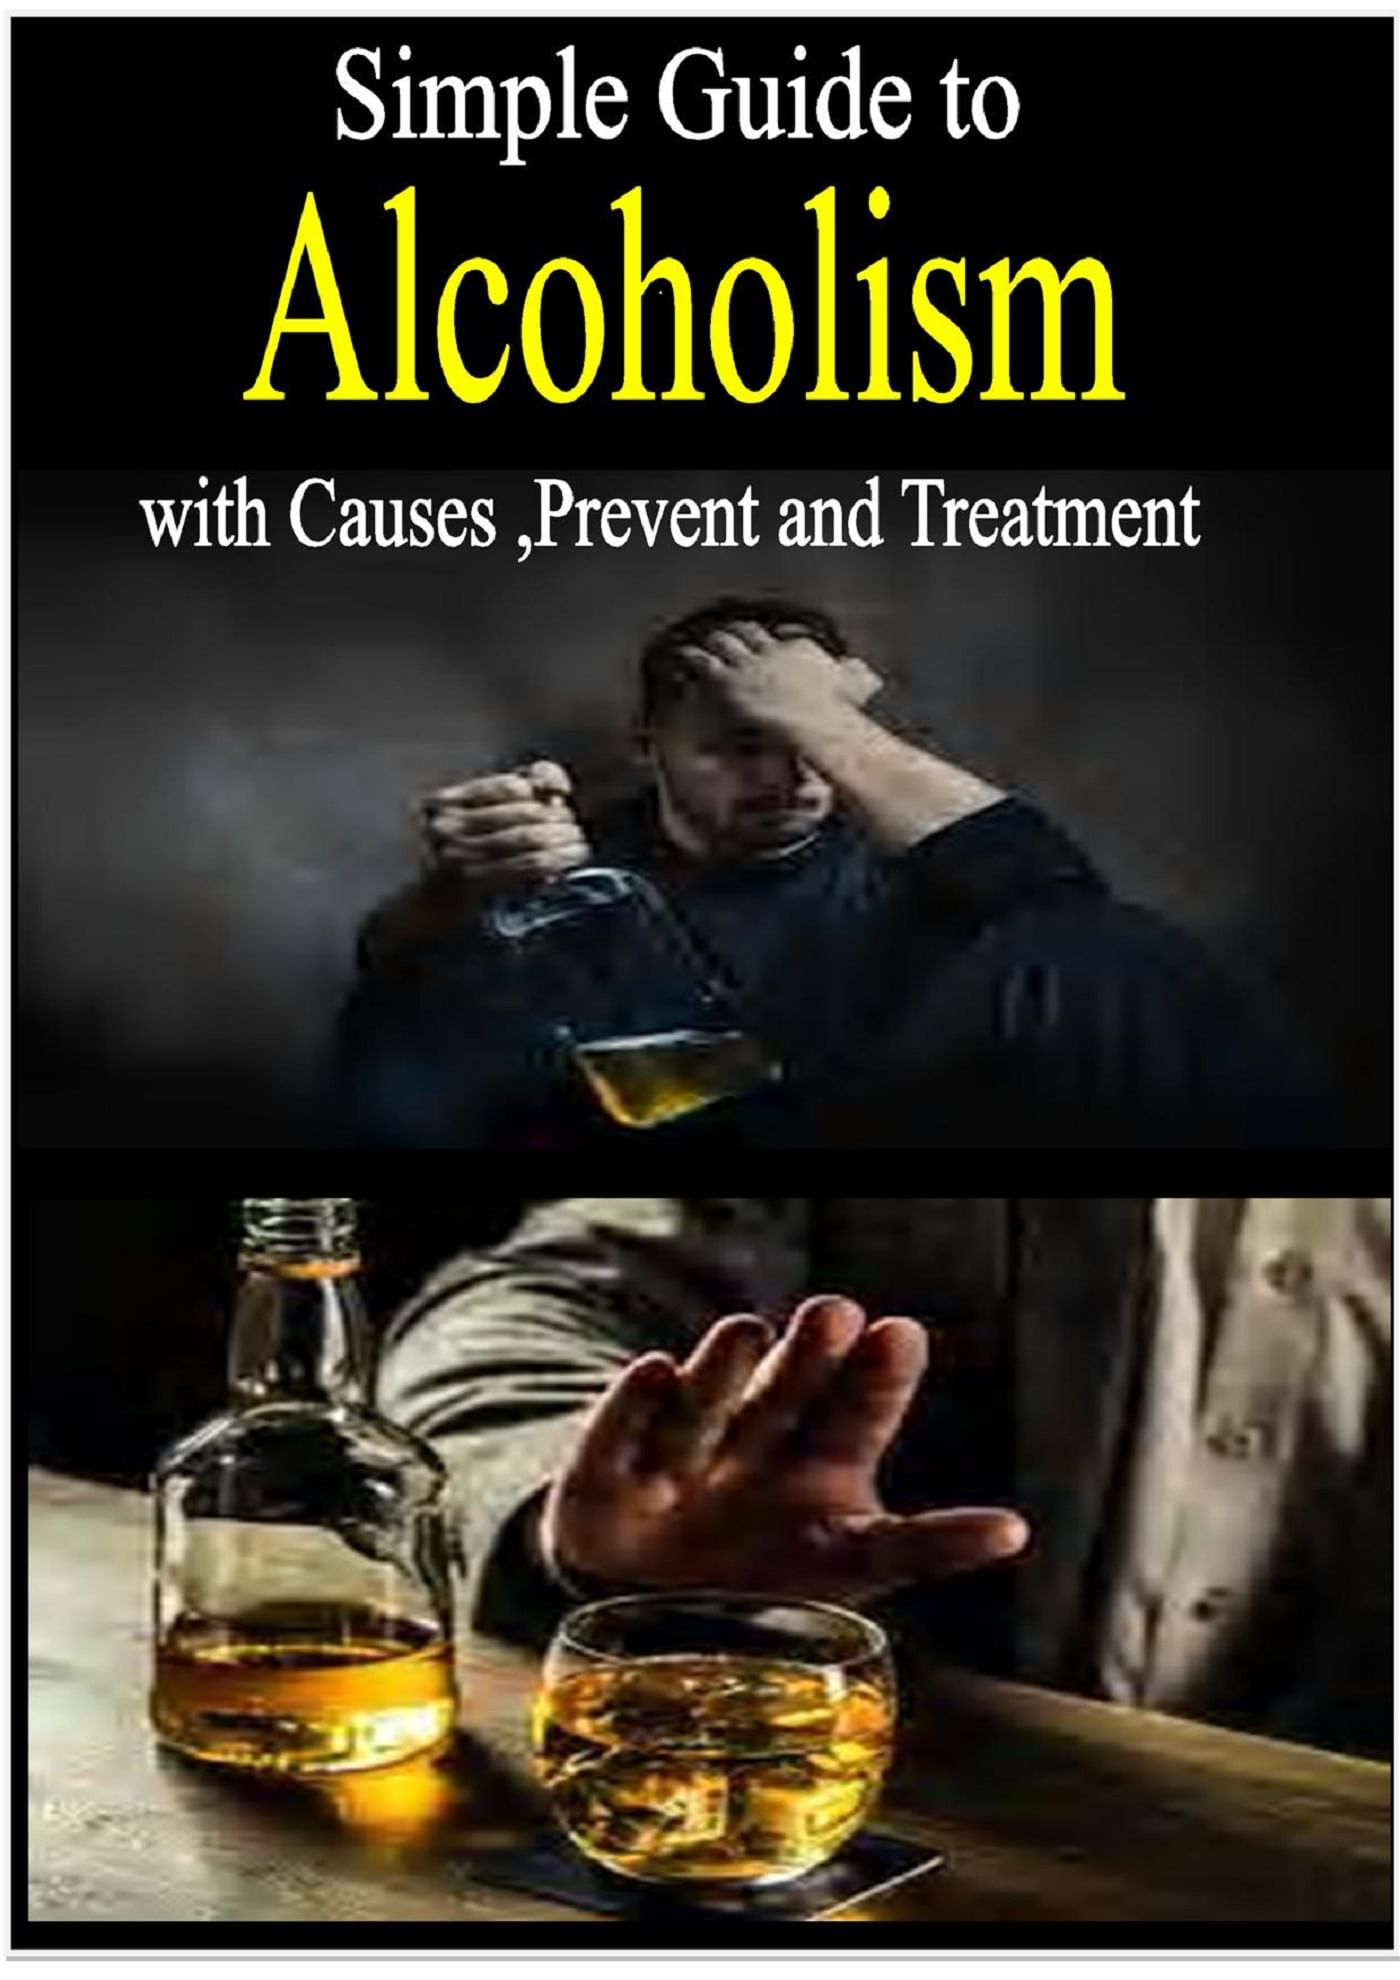 Simple Guide To Alcoholism - Know The Causes, Prevention & Treatment!